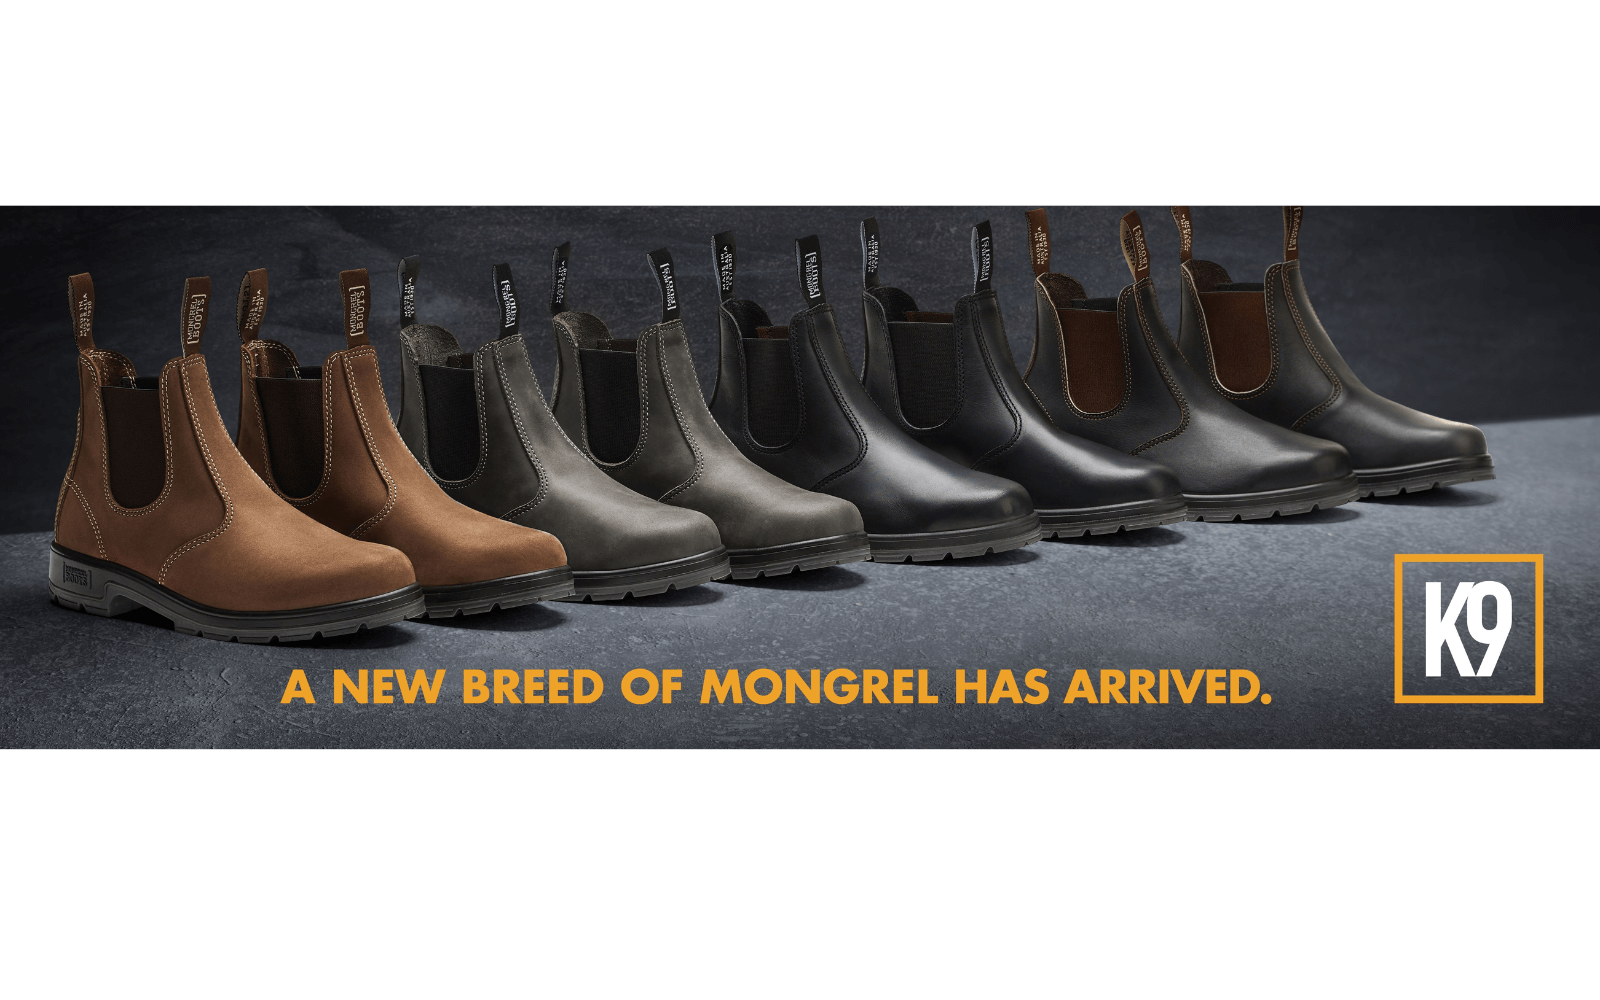 All the new colours of Mongrel Boots K9 placed in a row